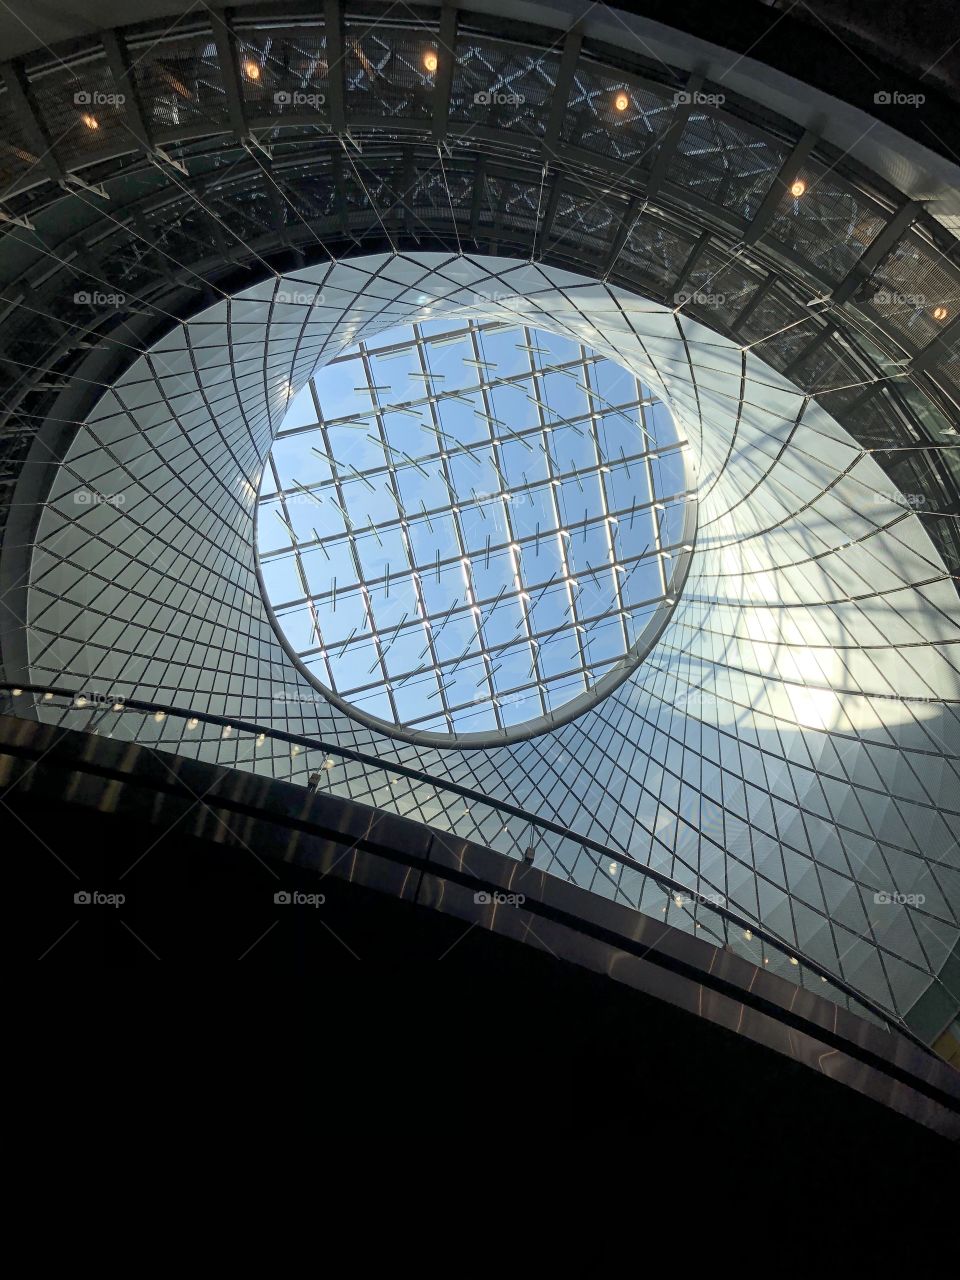 Oculus View to the Sky Subway Station